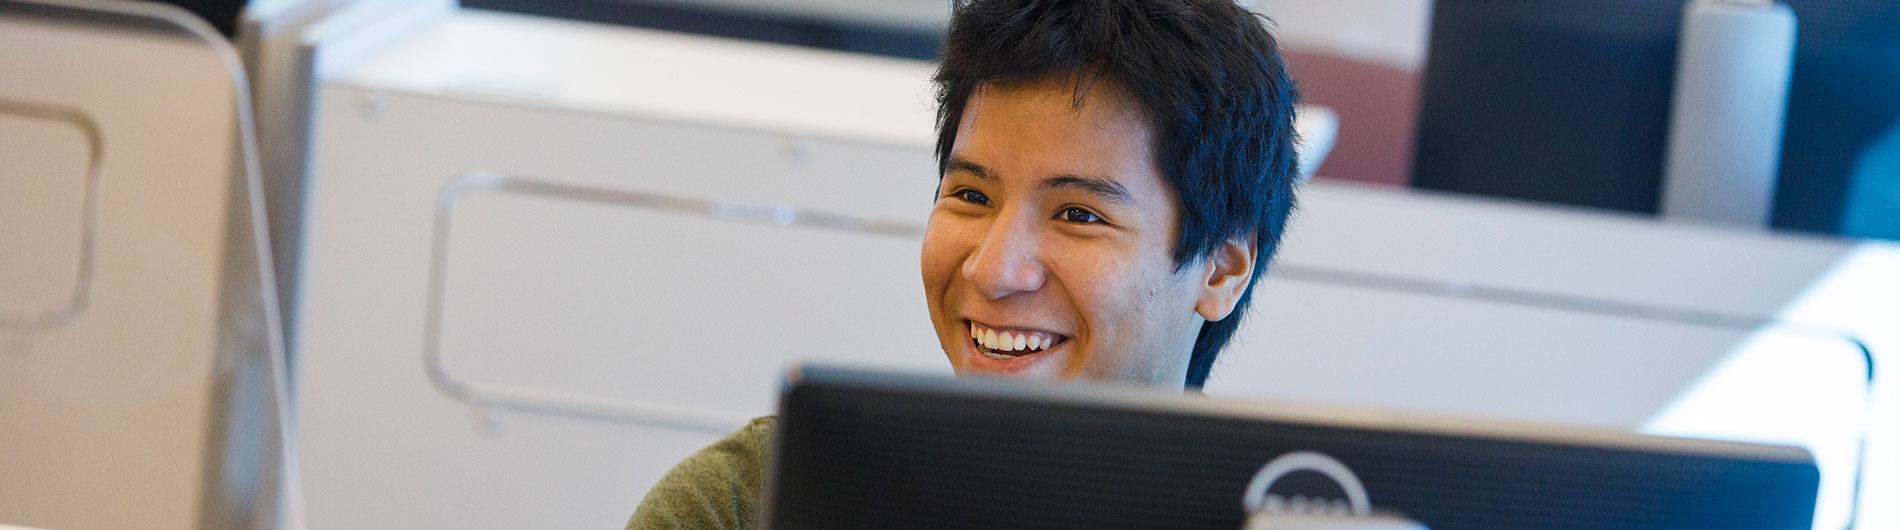 Male student in computer lab smiling and talking with counselor or adviser